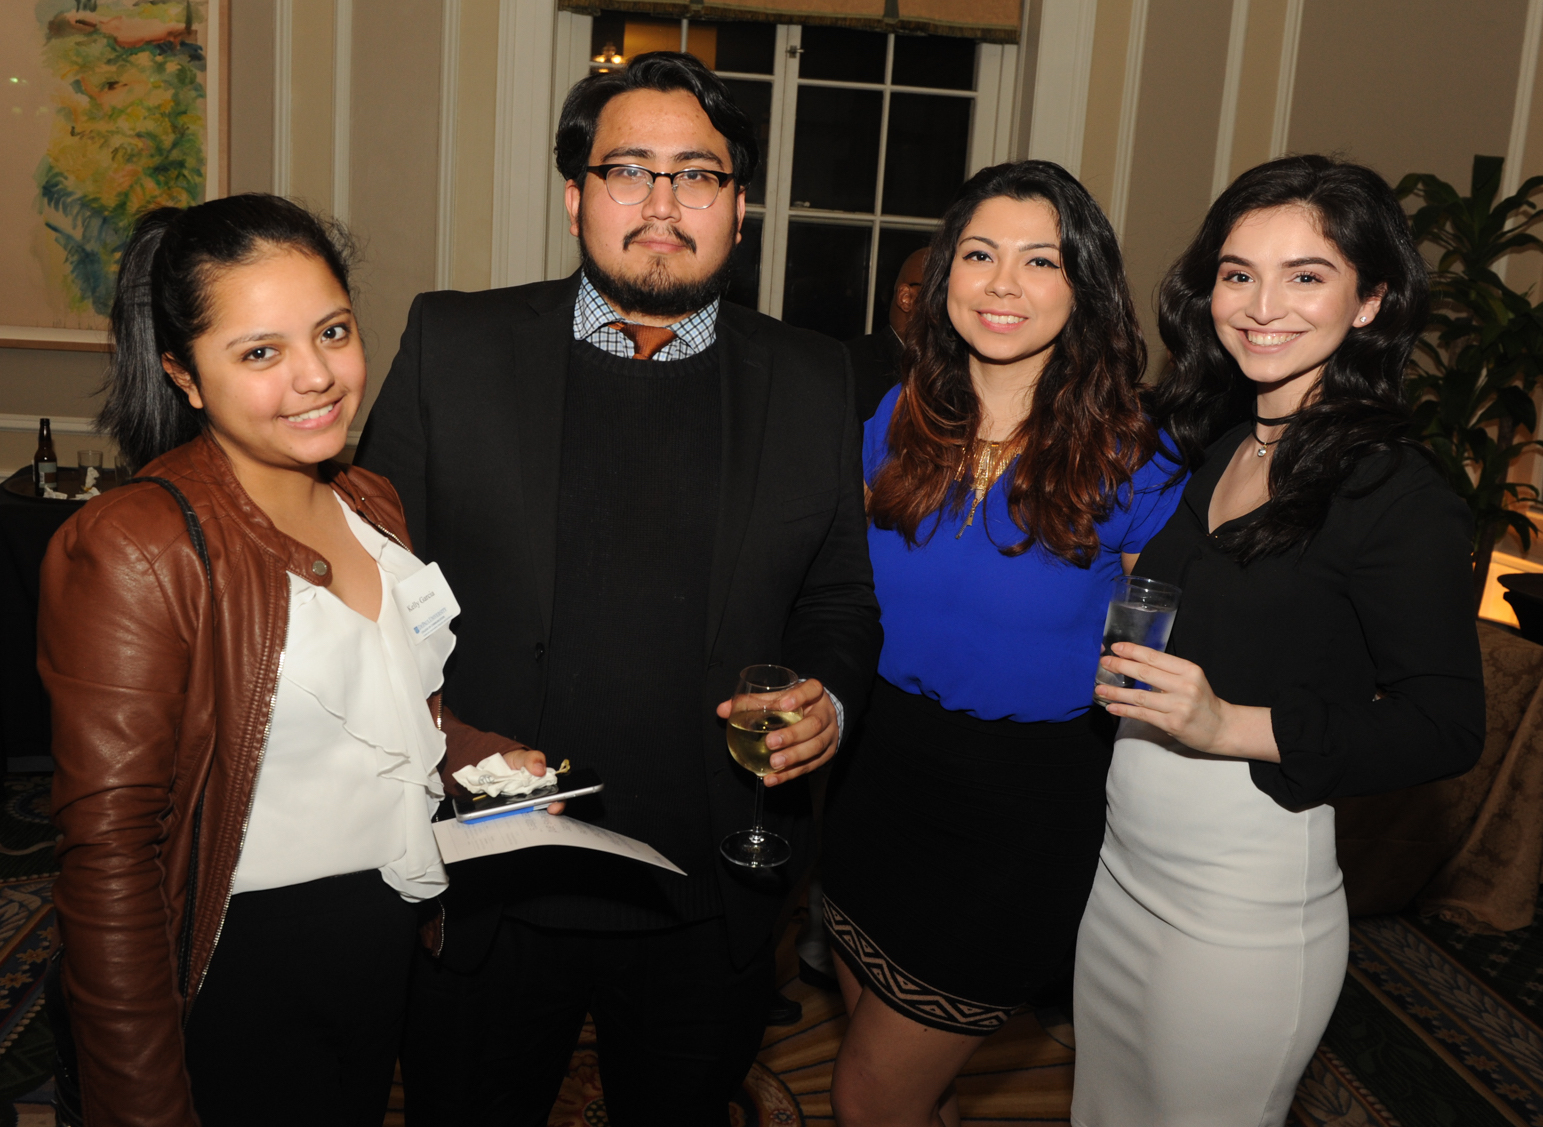 Journalism students and alumni were invited to attend the evening's event. (Photo Paul Berg.)